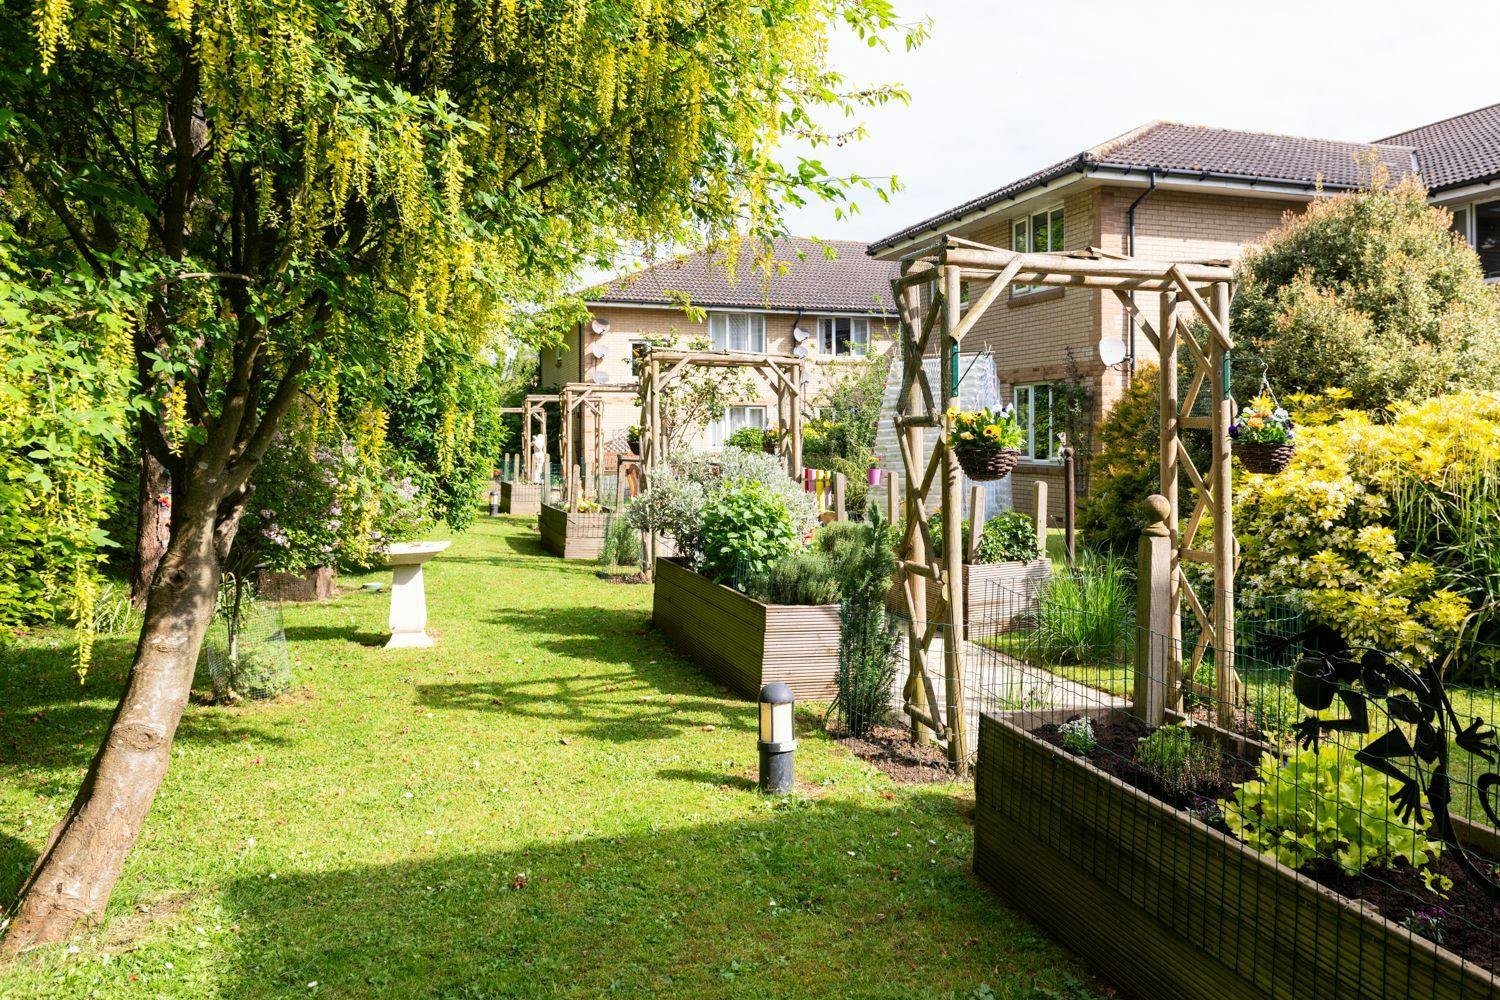 Goodwins Hall Care Home in King's Lynn, Norfolk